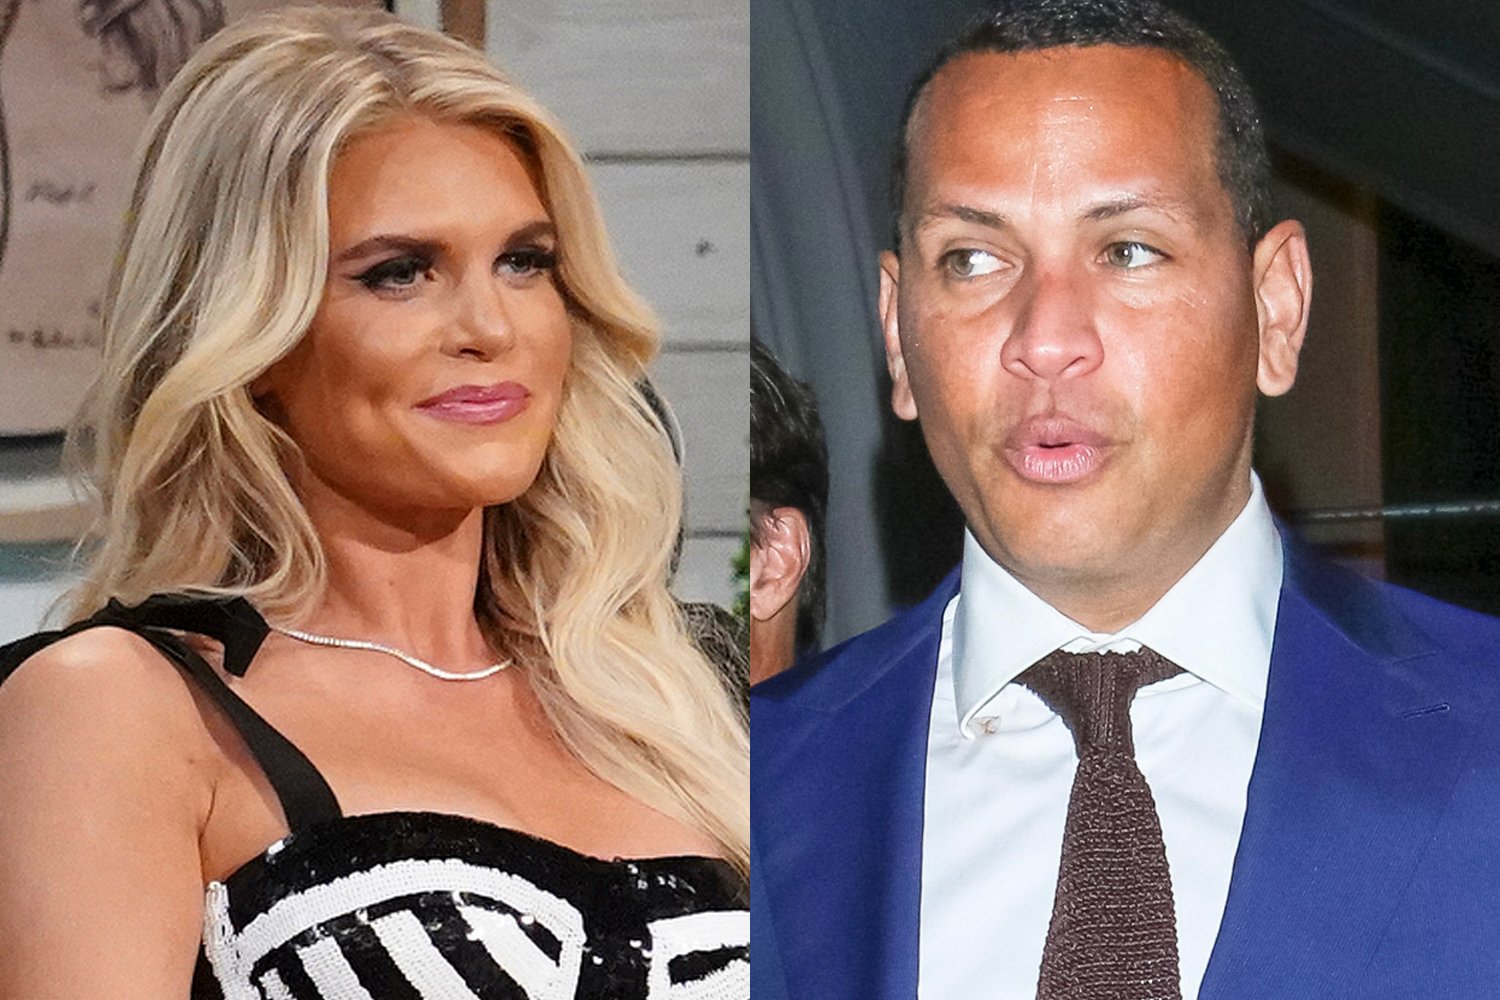 Madison LeCroy at the 'Southern Charm' reunion and Alex Rodriguez caught by paparazzi in L.A.